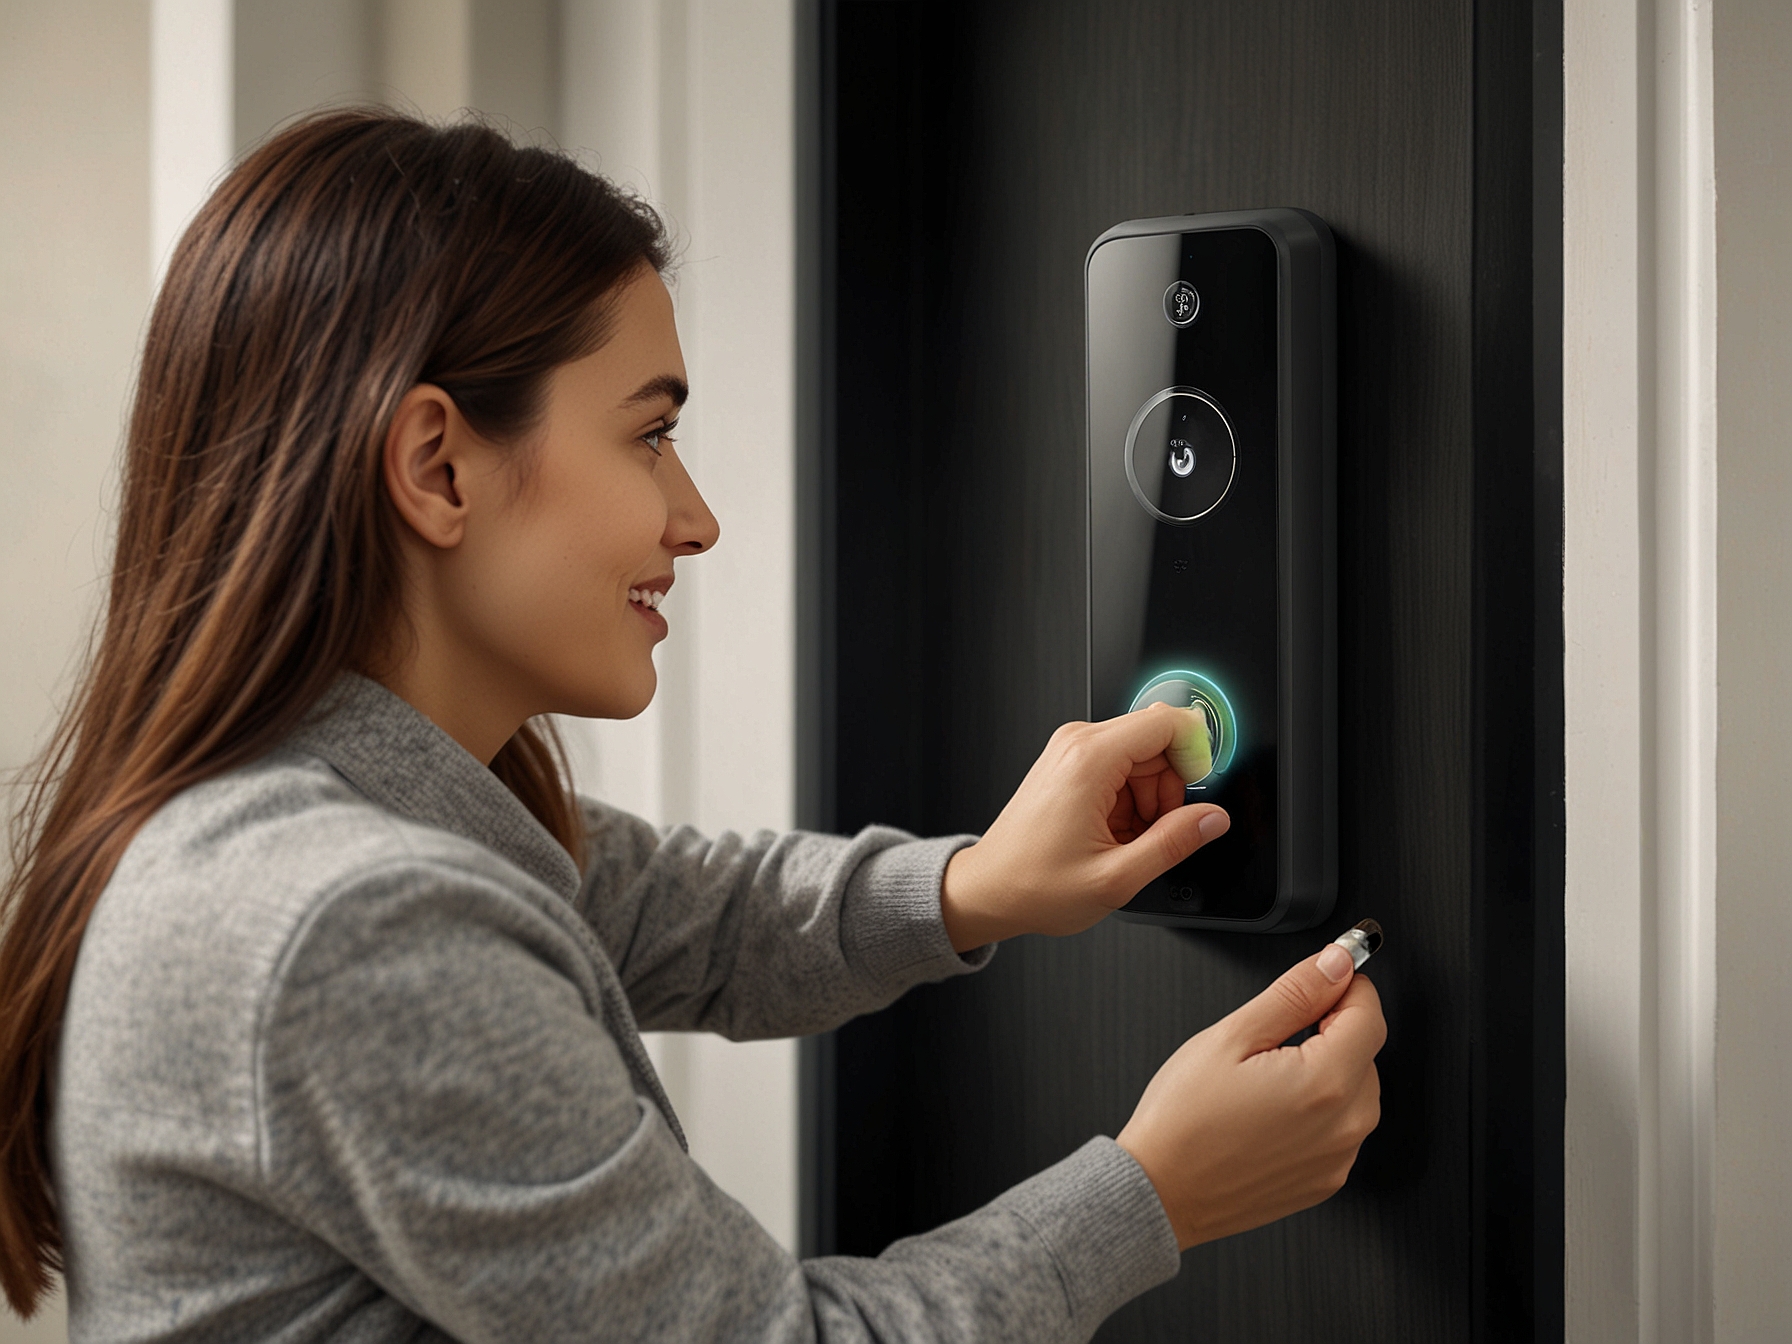 A homeowner uses the palm recognition feature of the Philips Home Access 5000 Series Smart Lock, demonstrating the device's advanced biometric sensors and quick response time.